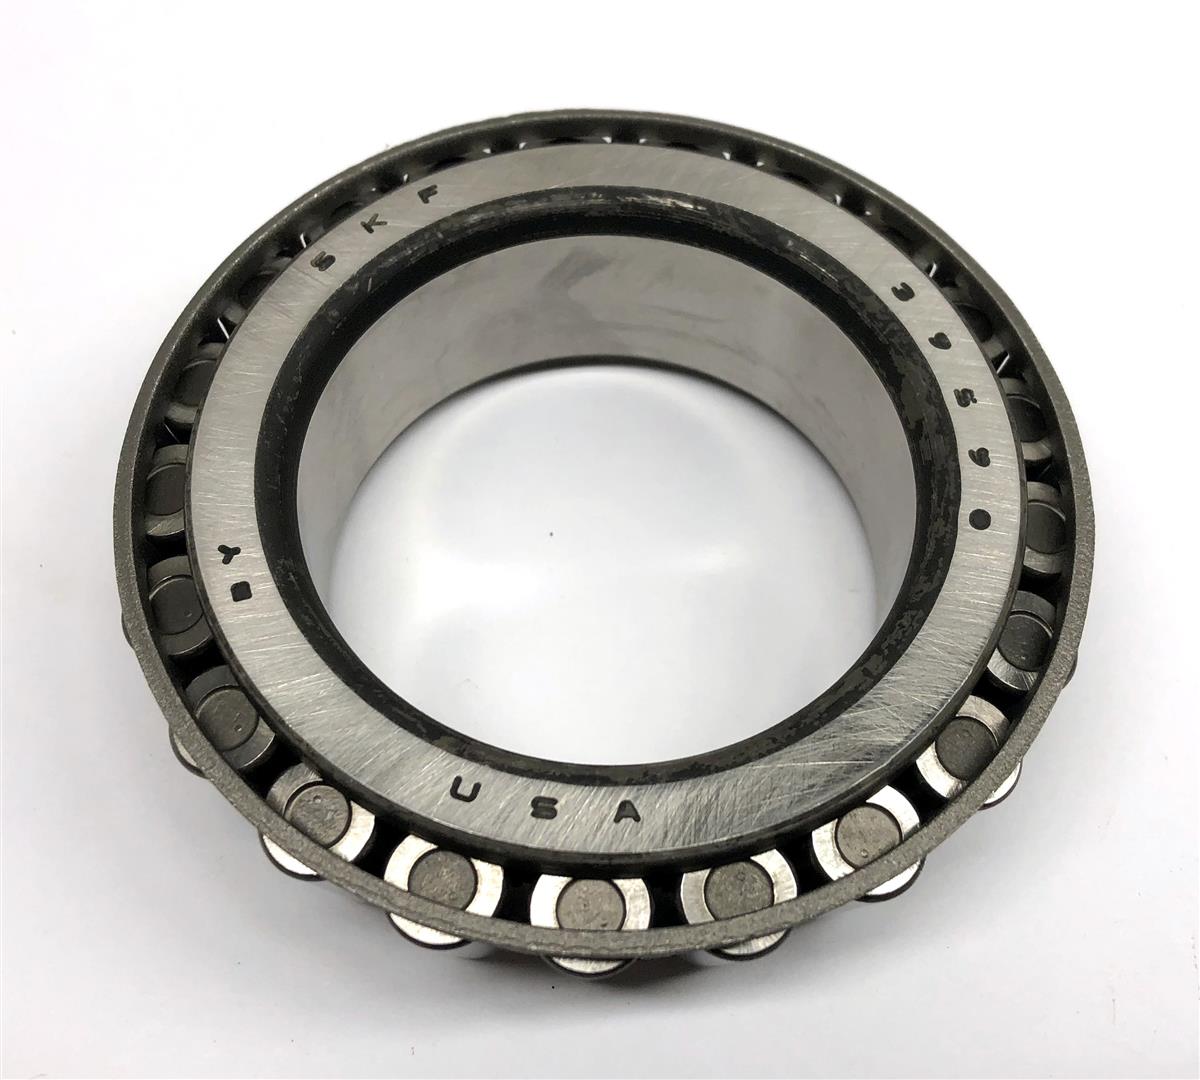 SP-2778 | SP-2778 MEP-803A Tapered Roller Bearing Cone with Rollers (1).JPG